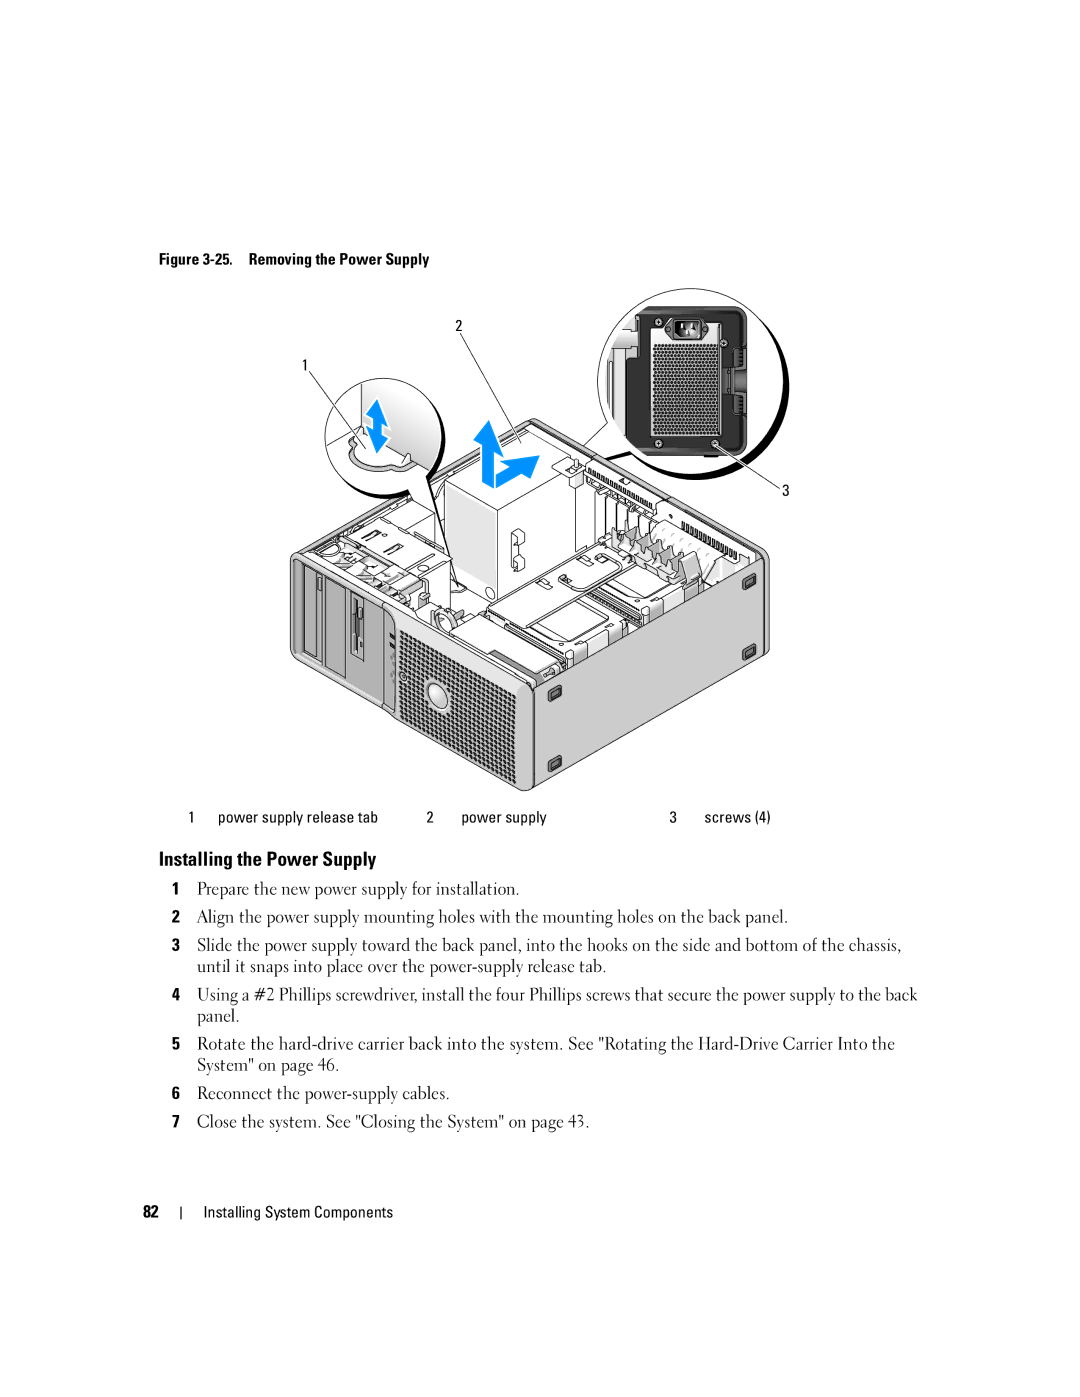 Dell SC1430 owner manual Installing the Power Supply, Removing the Power Supply Power supply release tab 